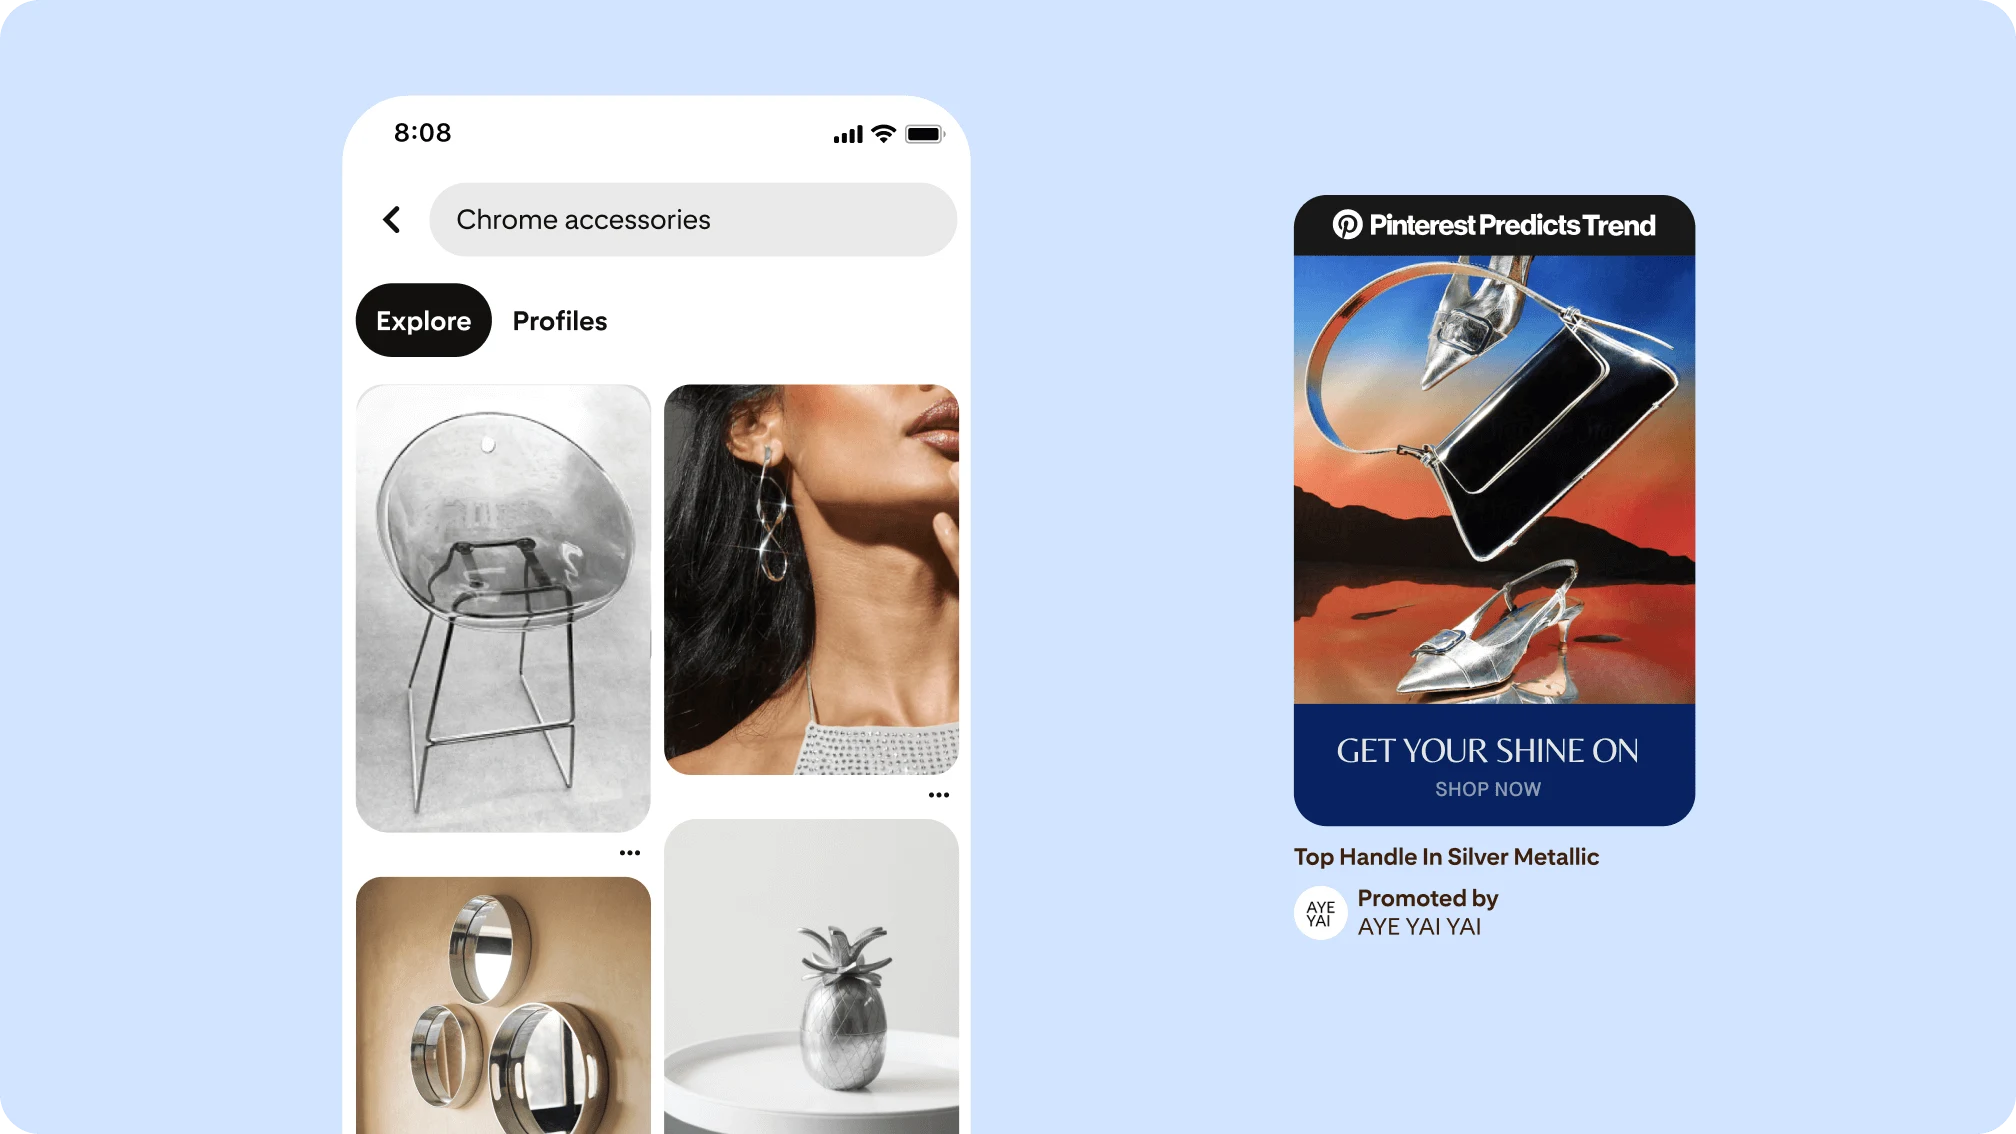 An image of the Pinterest home feed with “Chrome accessories” written in the search bar appears at left, with several Pins below featuring chrome accessories and furniture. At right, a Pin-shaped ad reads “Get your shine on.”